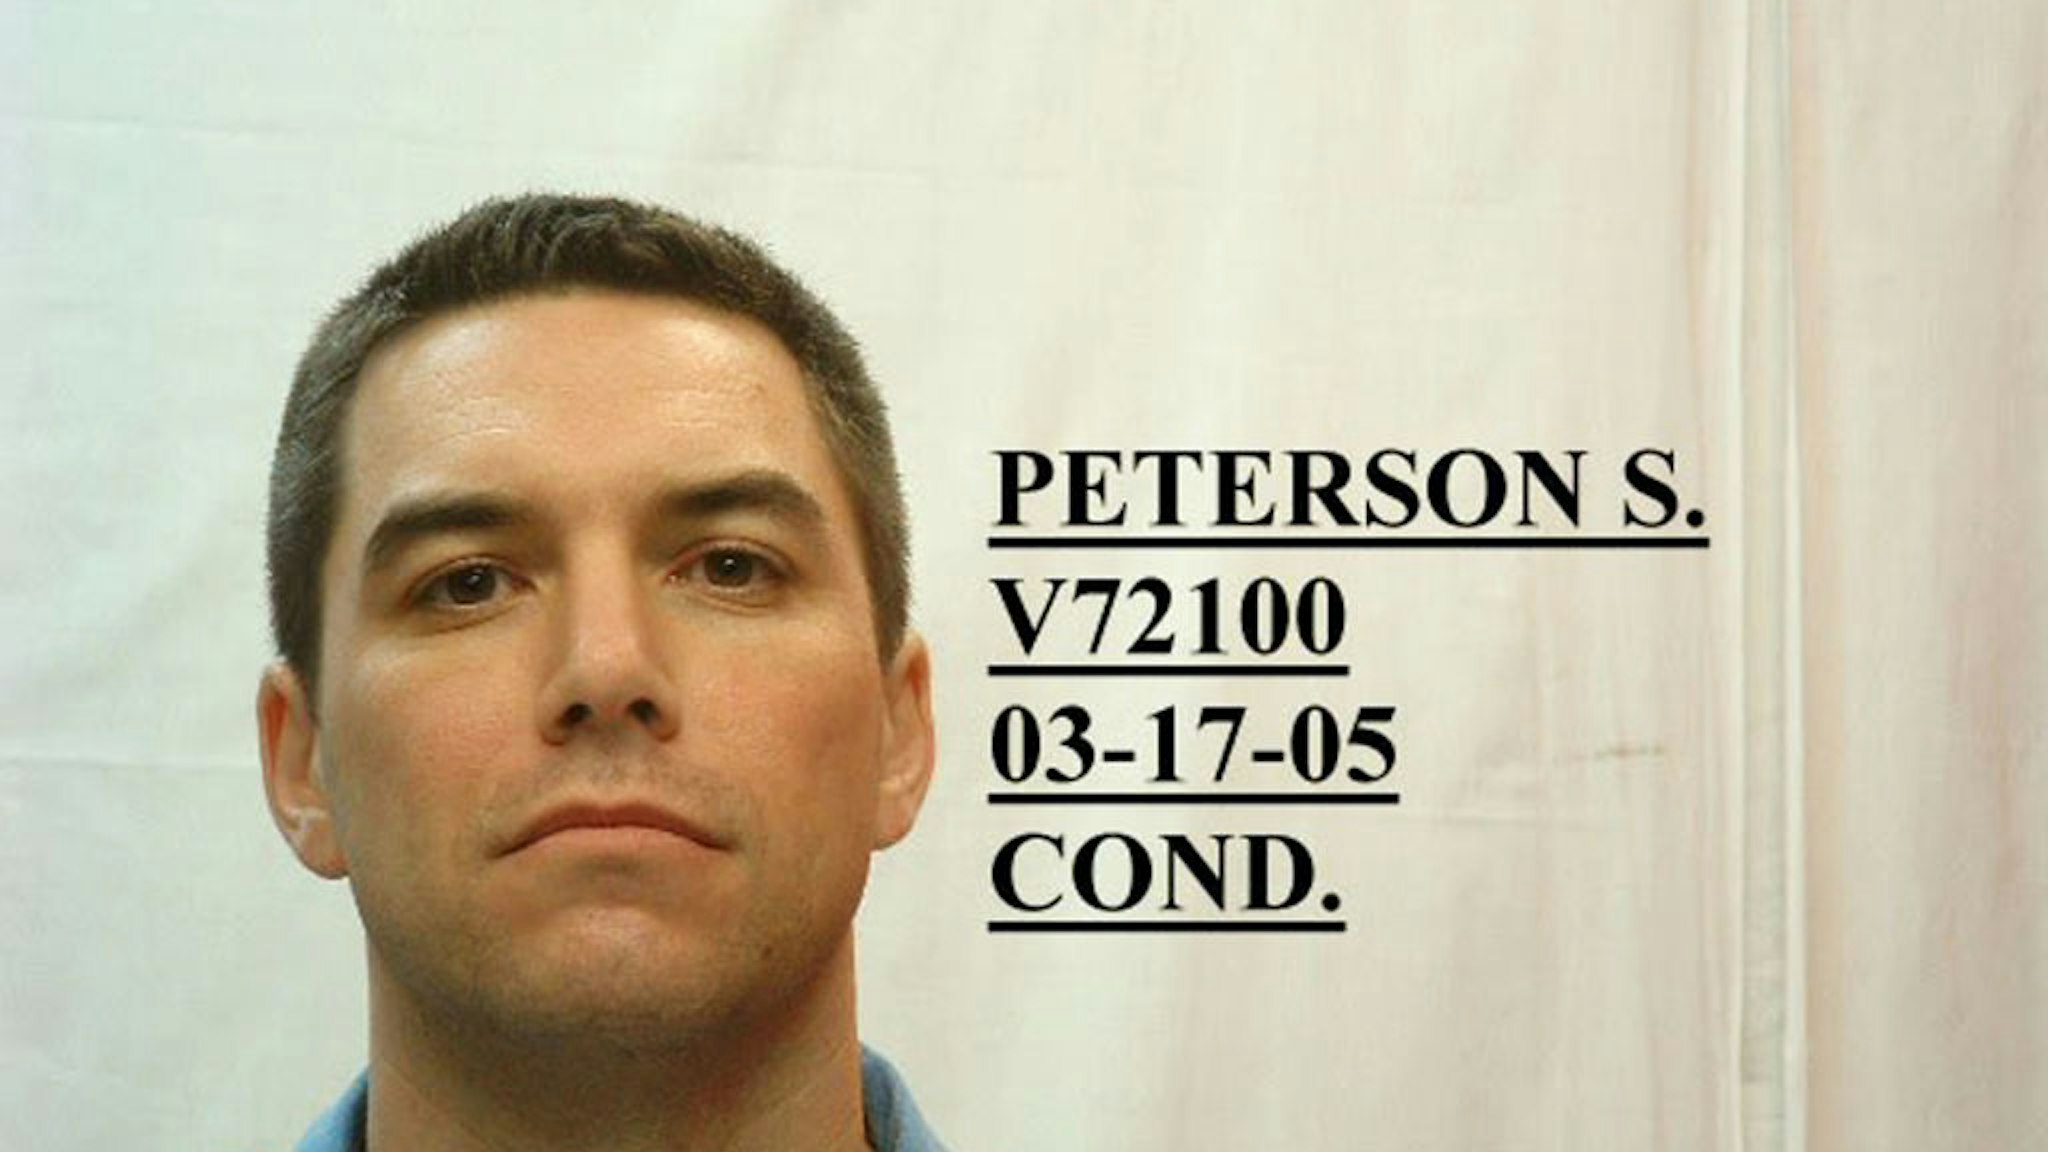 In this handout image provided by the California Department of Corrections, convicted murderer Scott Peterson poses for a mug shot March 17, 2005 in San Quentin, California. Judge Alfred A. Delucchi sentenced Peterson to death March 16 for murdering his wife, Laci Peterson, and their unborn child.